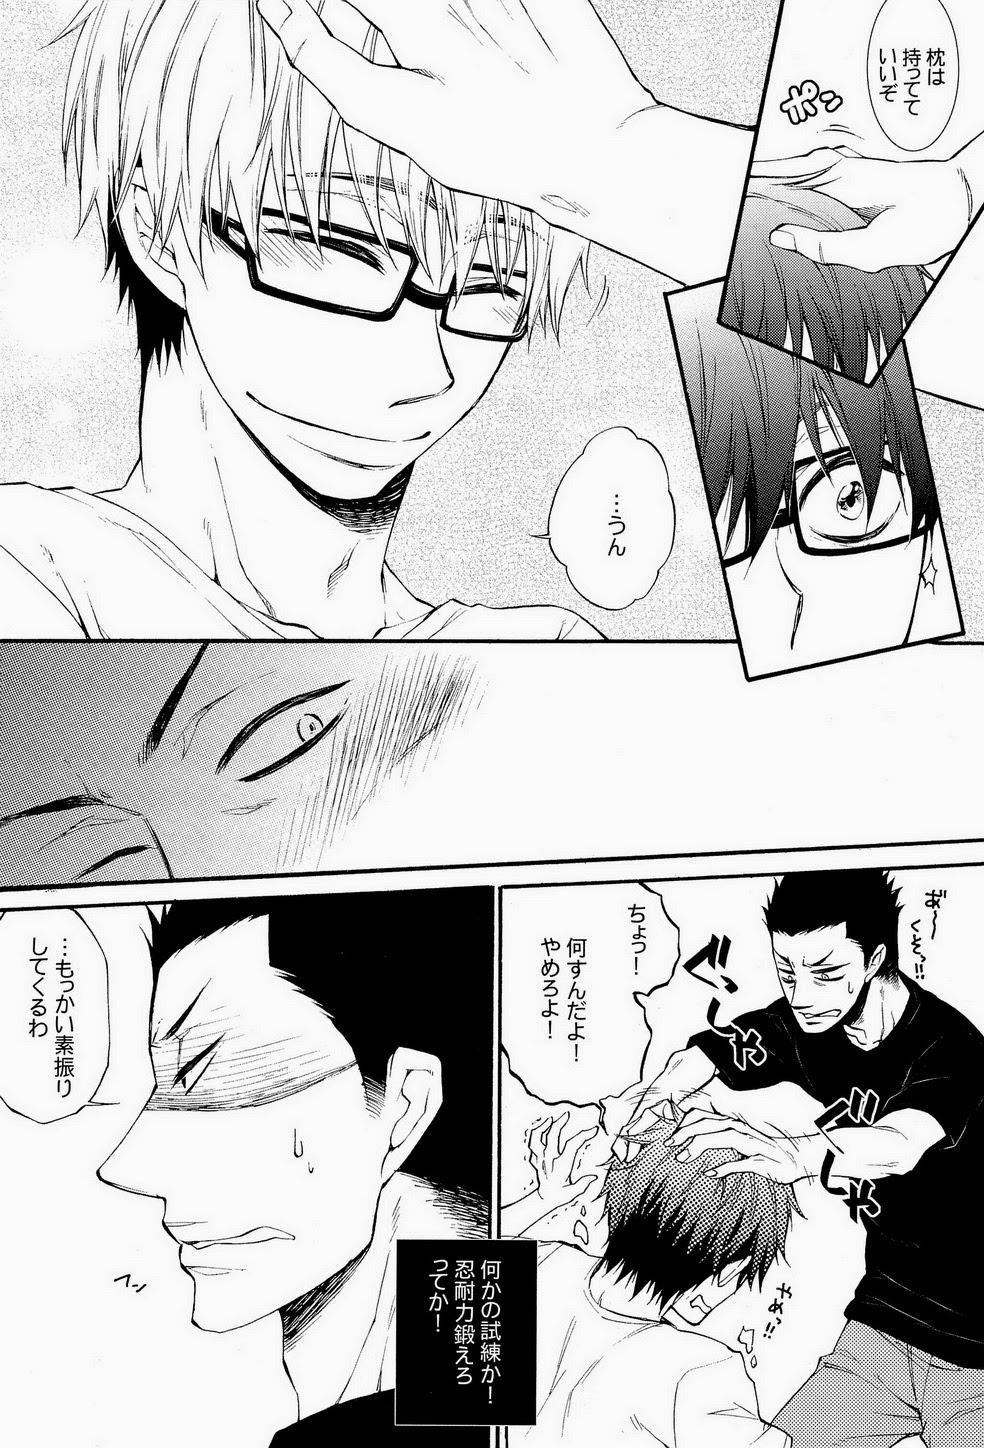 Tribute Re-recording book - Silver spoon Kink - Page 8